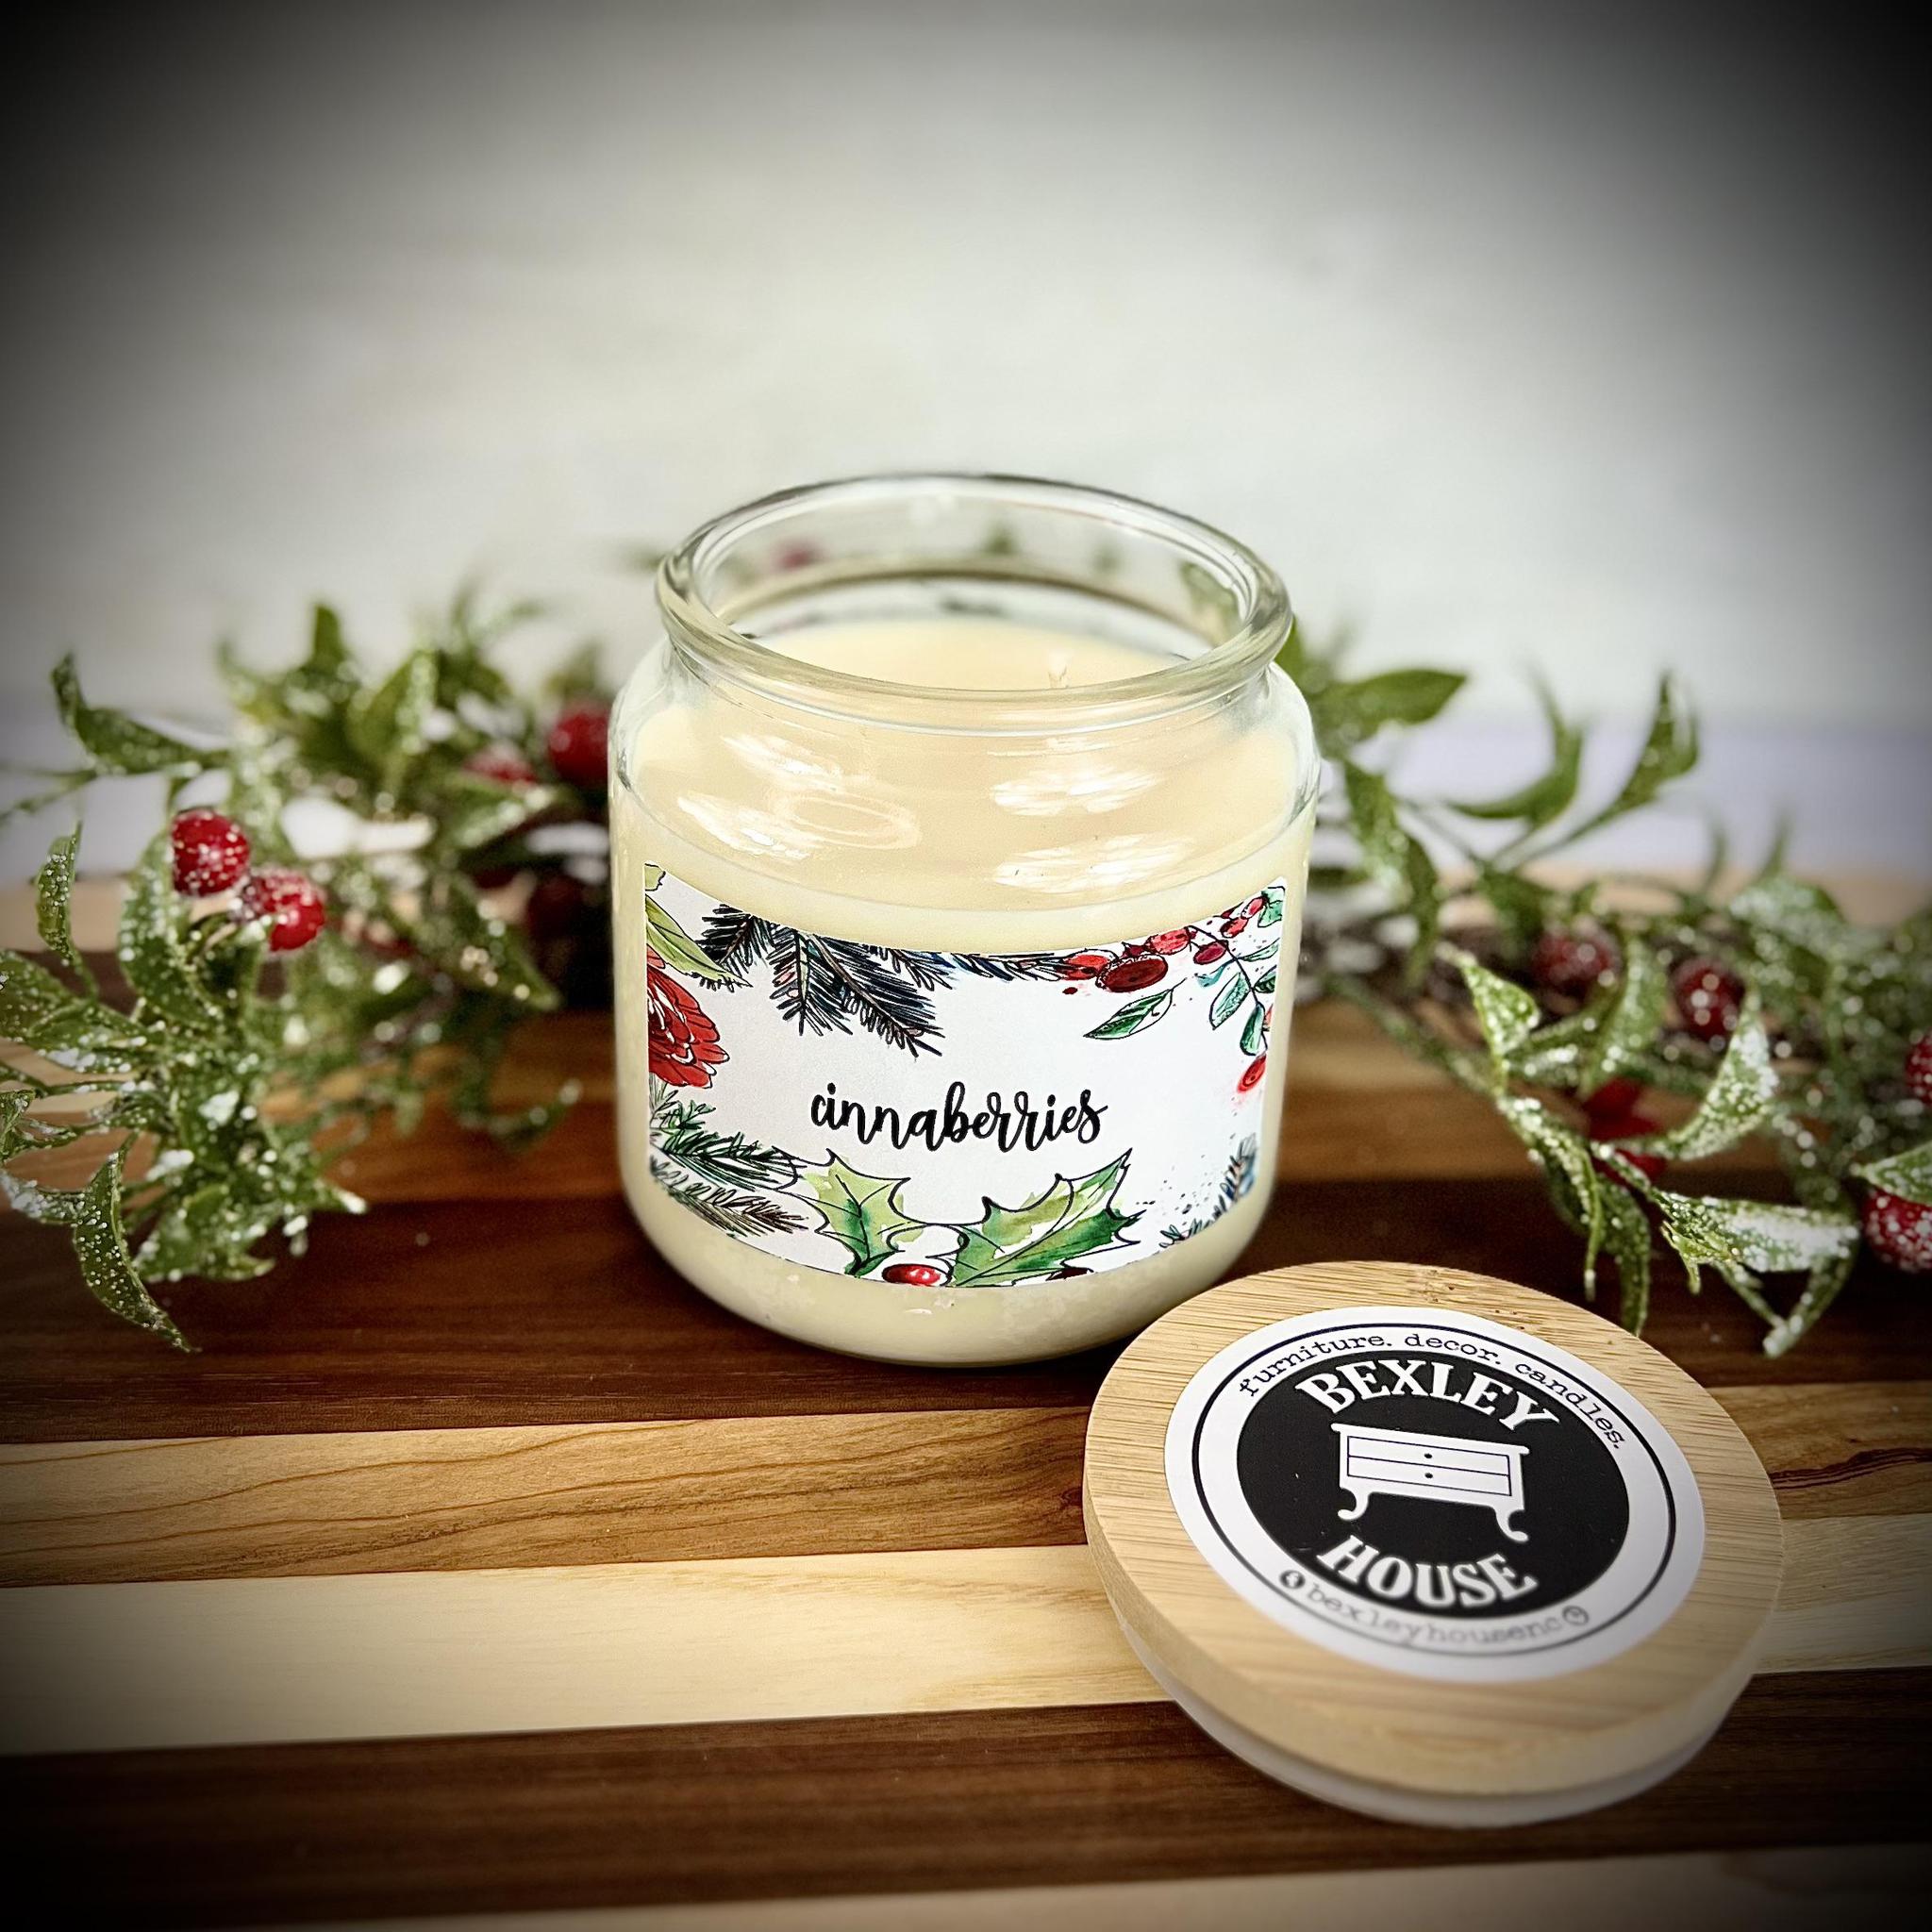 Bexley House 16oz Apothecary Candle - Cinnaberries